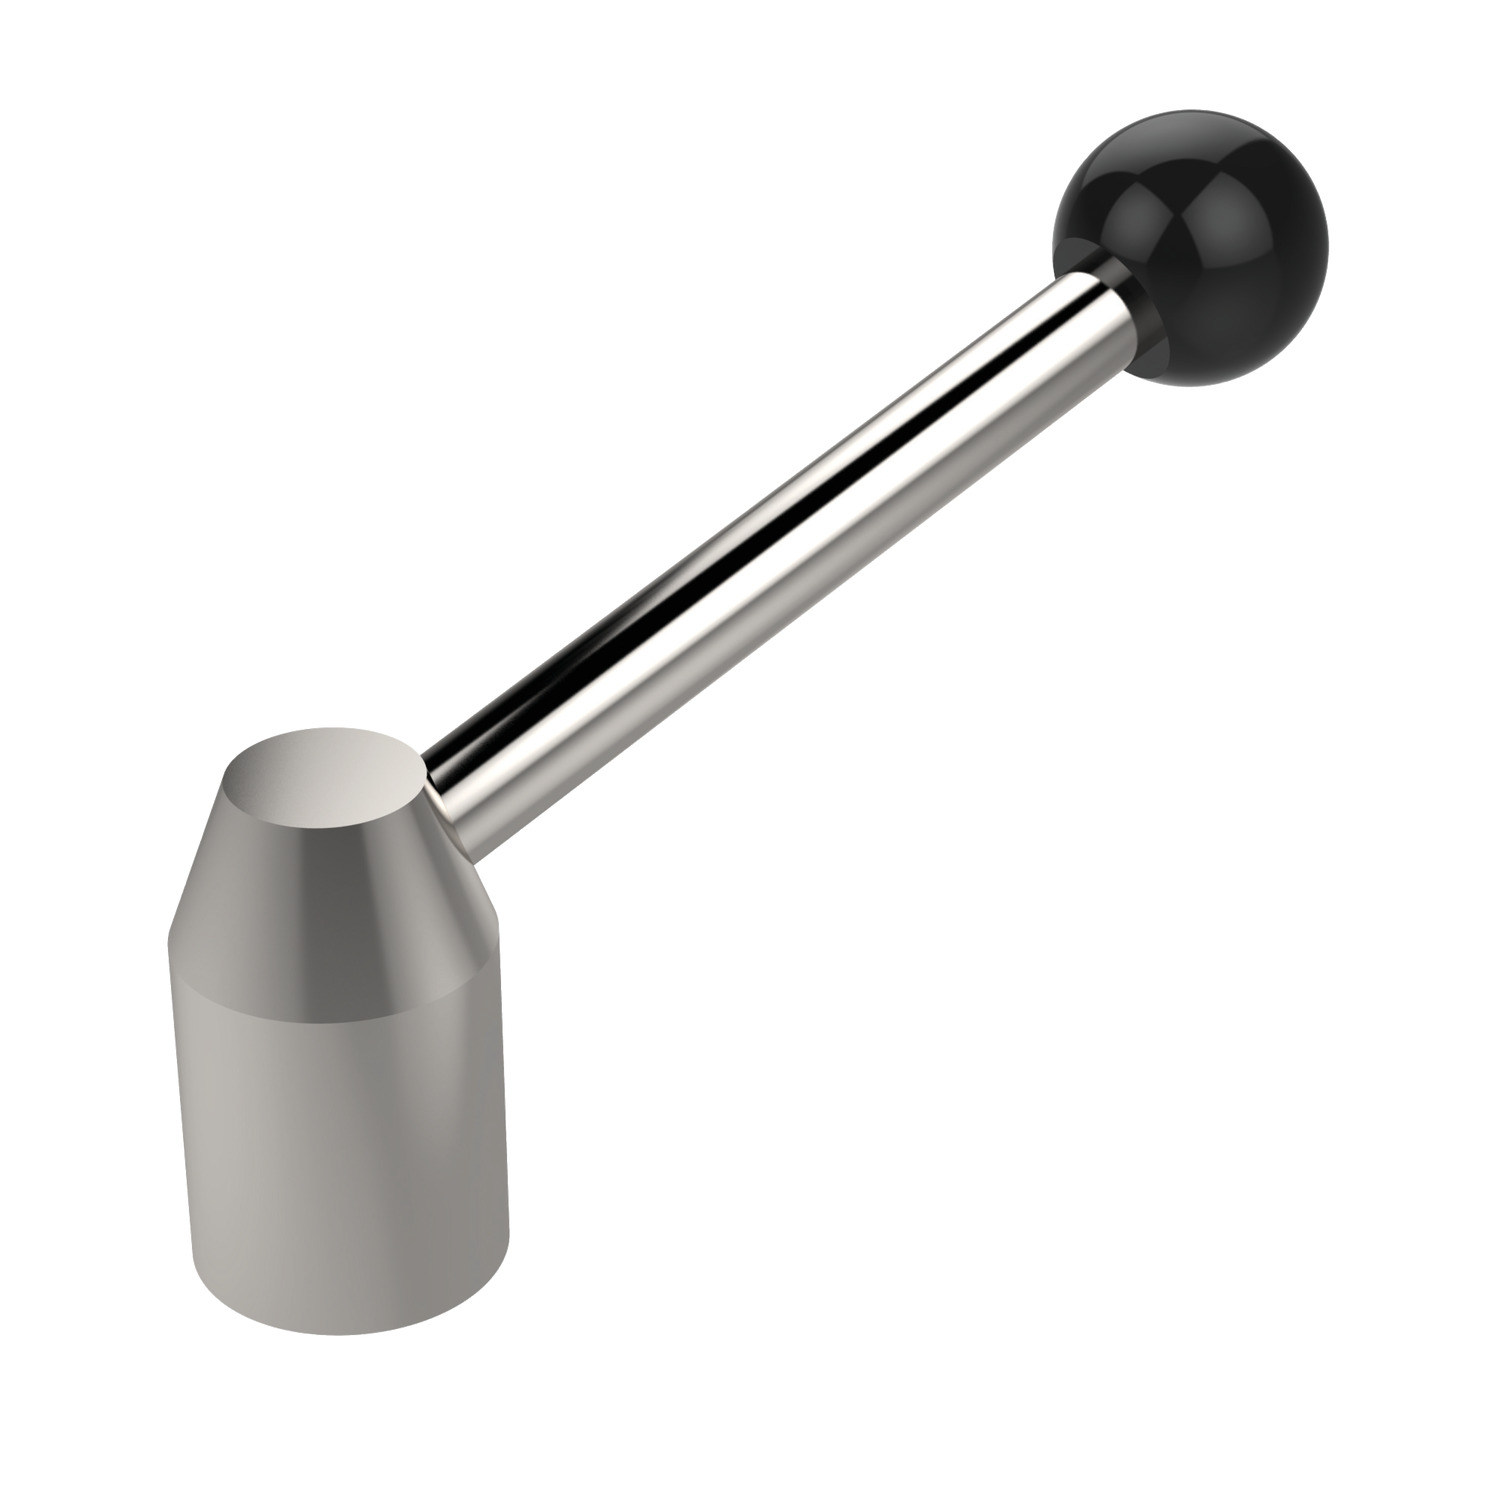 Product 74520, Adjustable Clamping Lever stainless steel - threaded bore / 